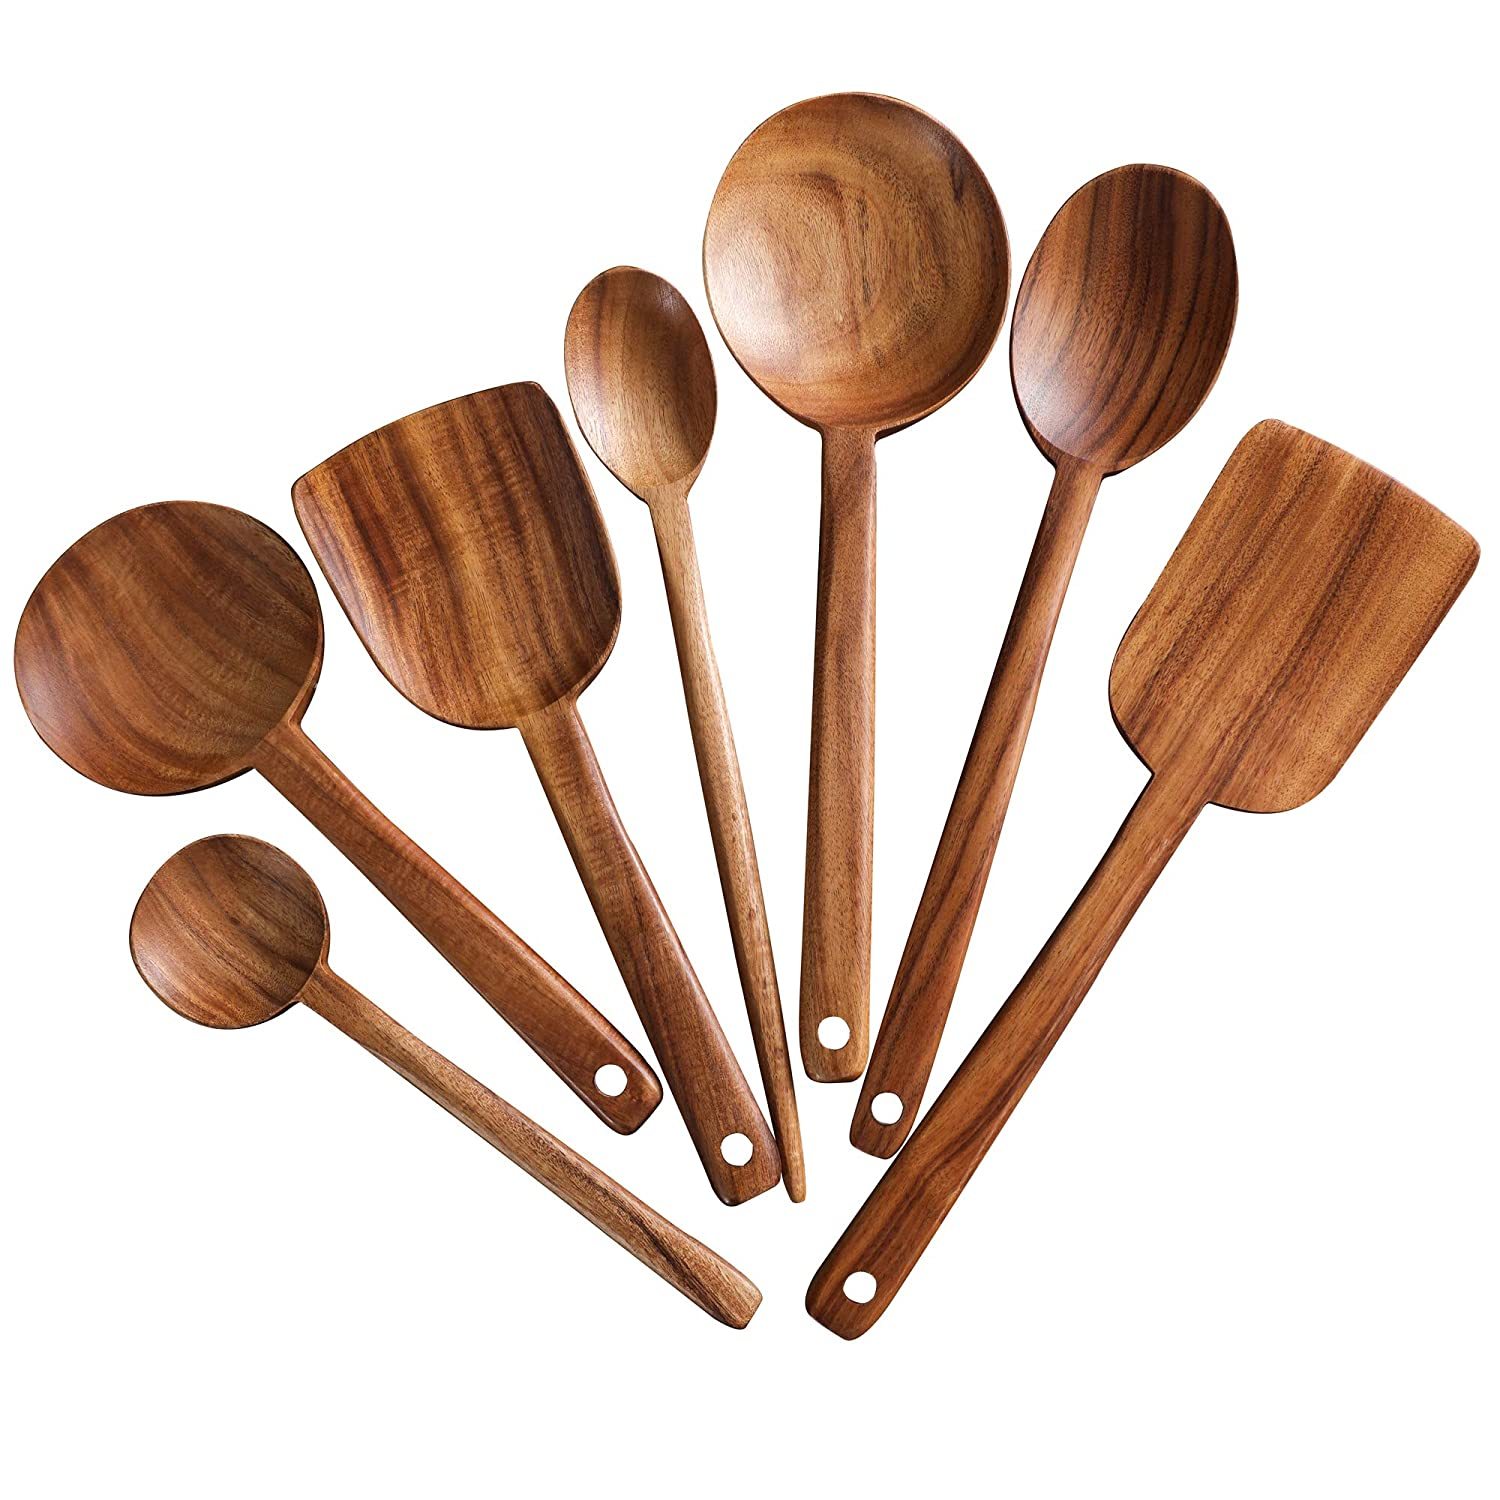 Primary image for 7Pcs Long Handle Wooden Cooking Utensil Set Non-Stick Pan Kitchen Tool, Wooden C